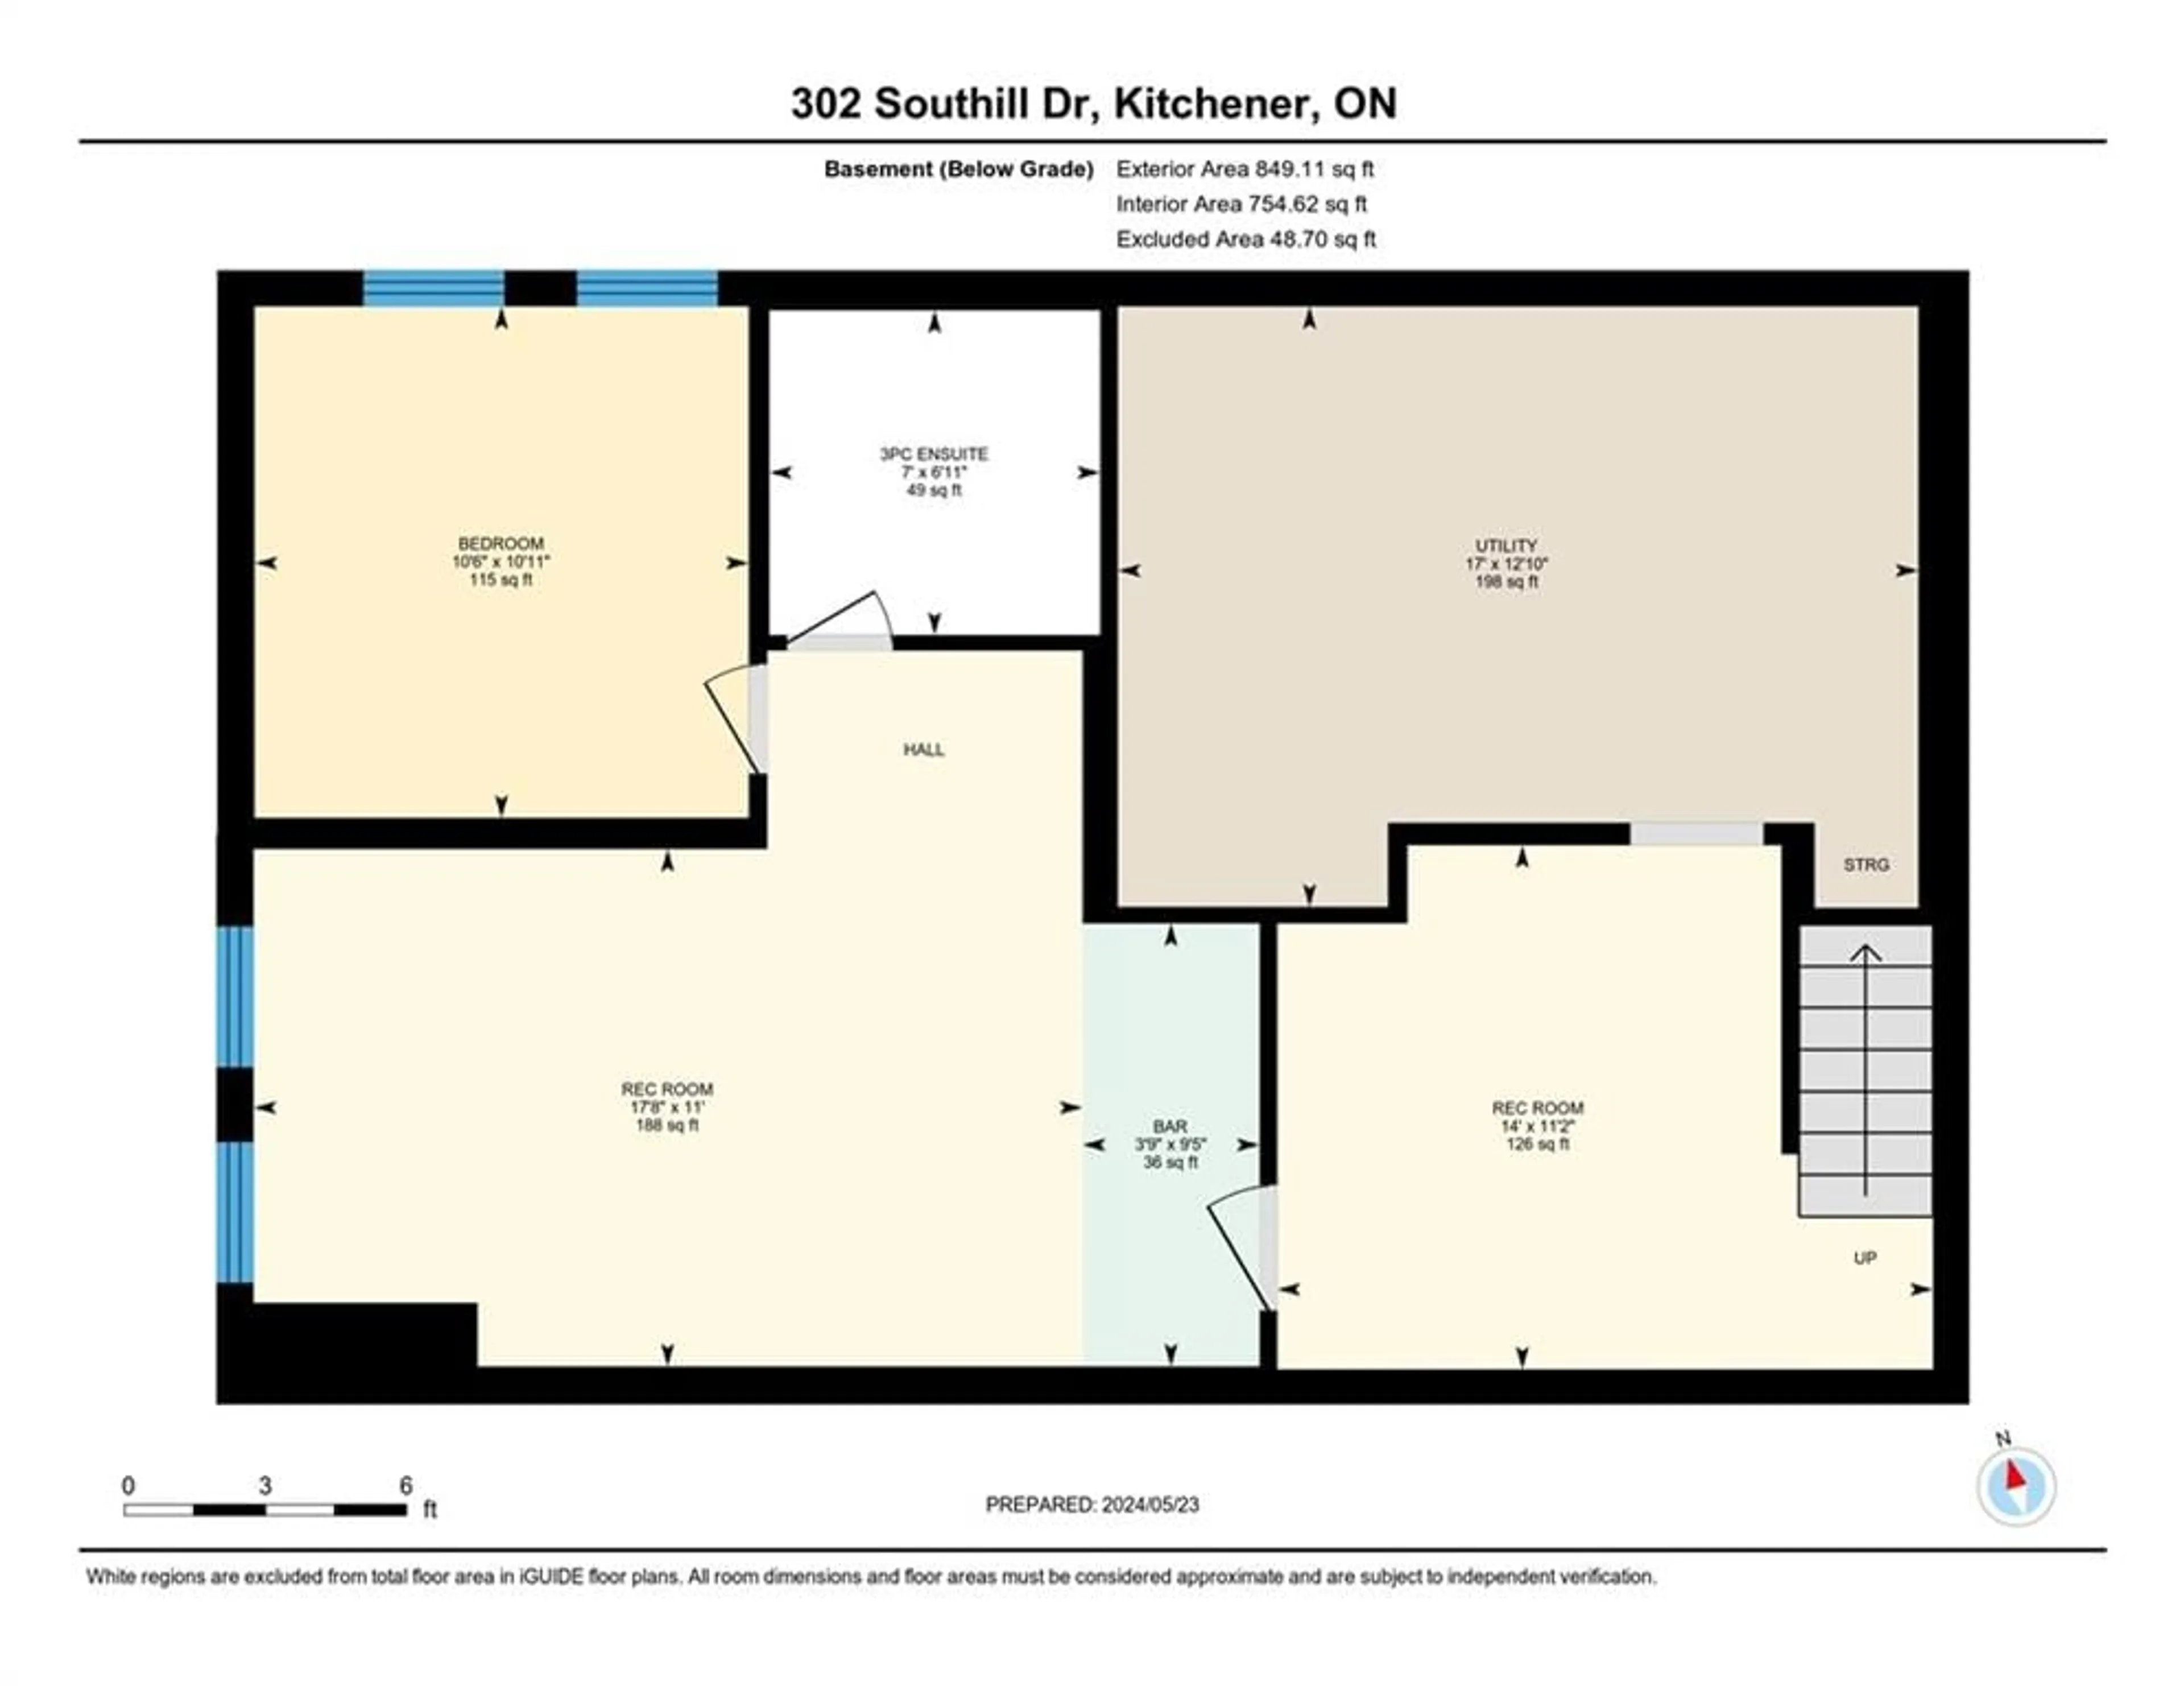 Floor plan for 302 Southill Dr, Kitchener Ontario N2A 2R1